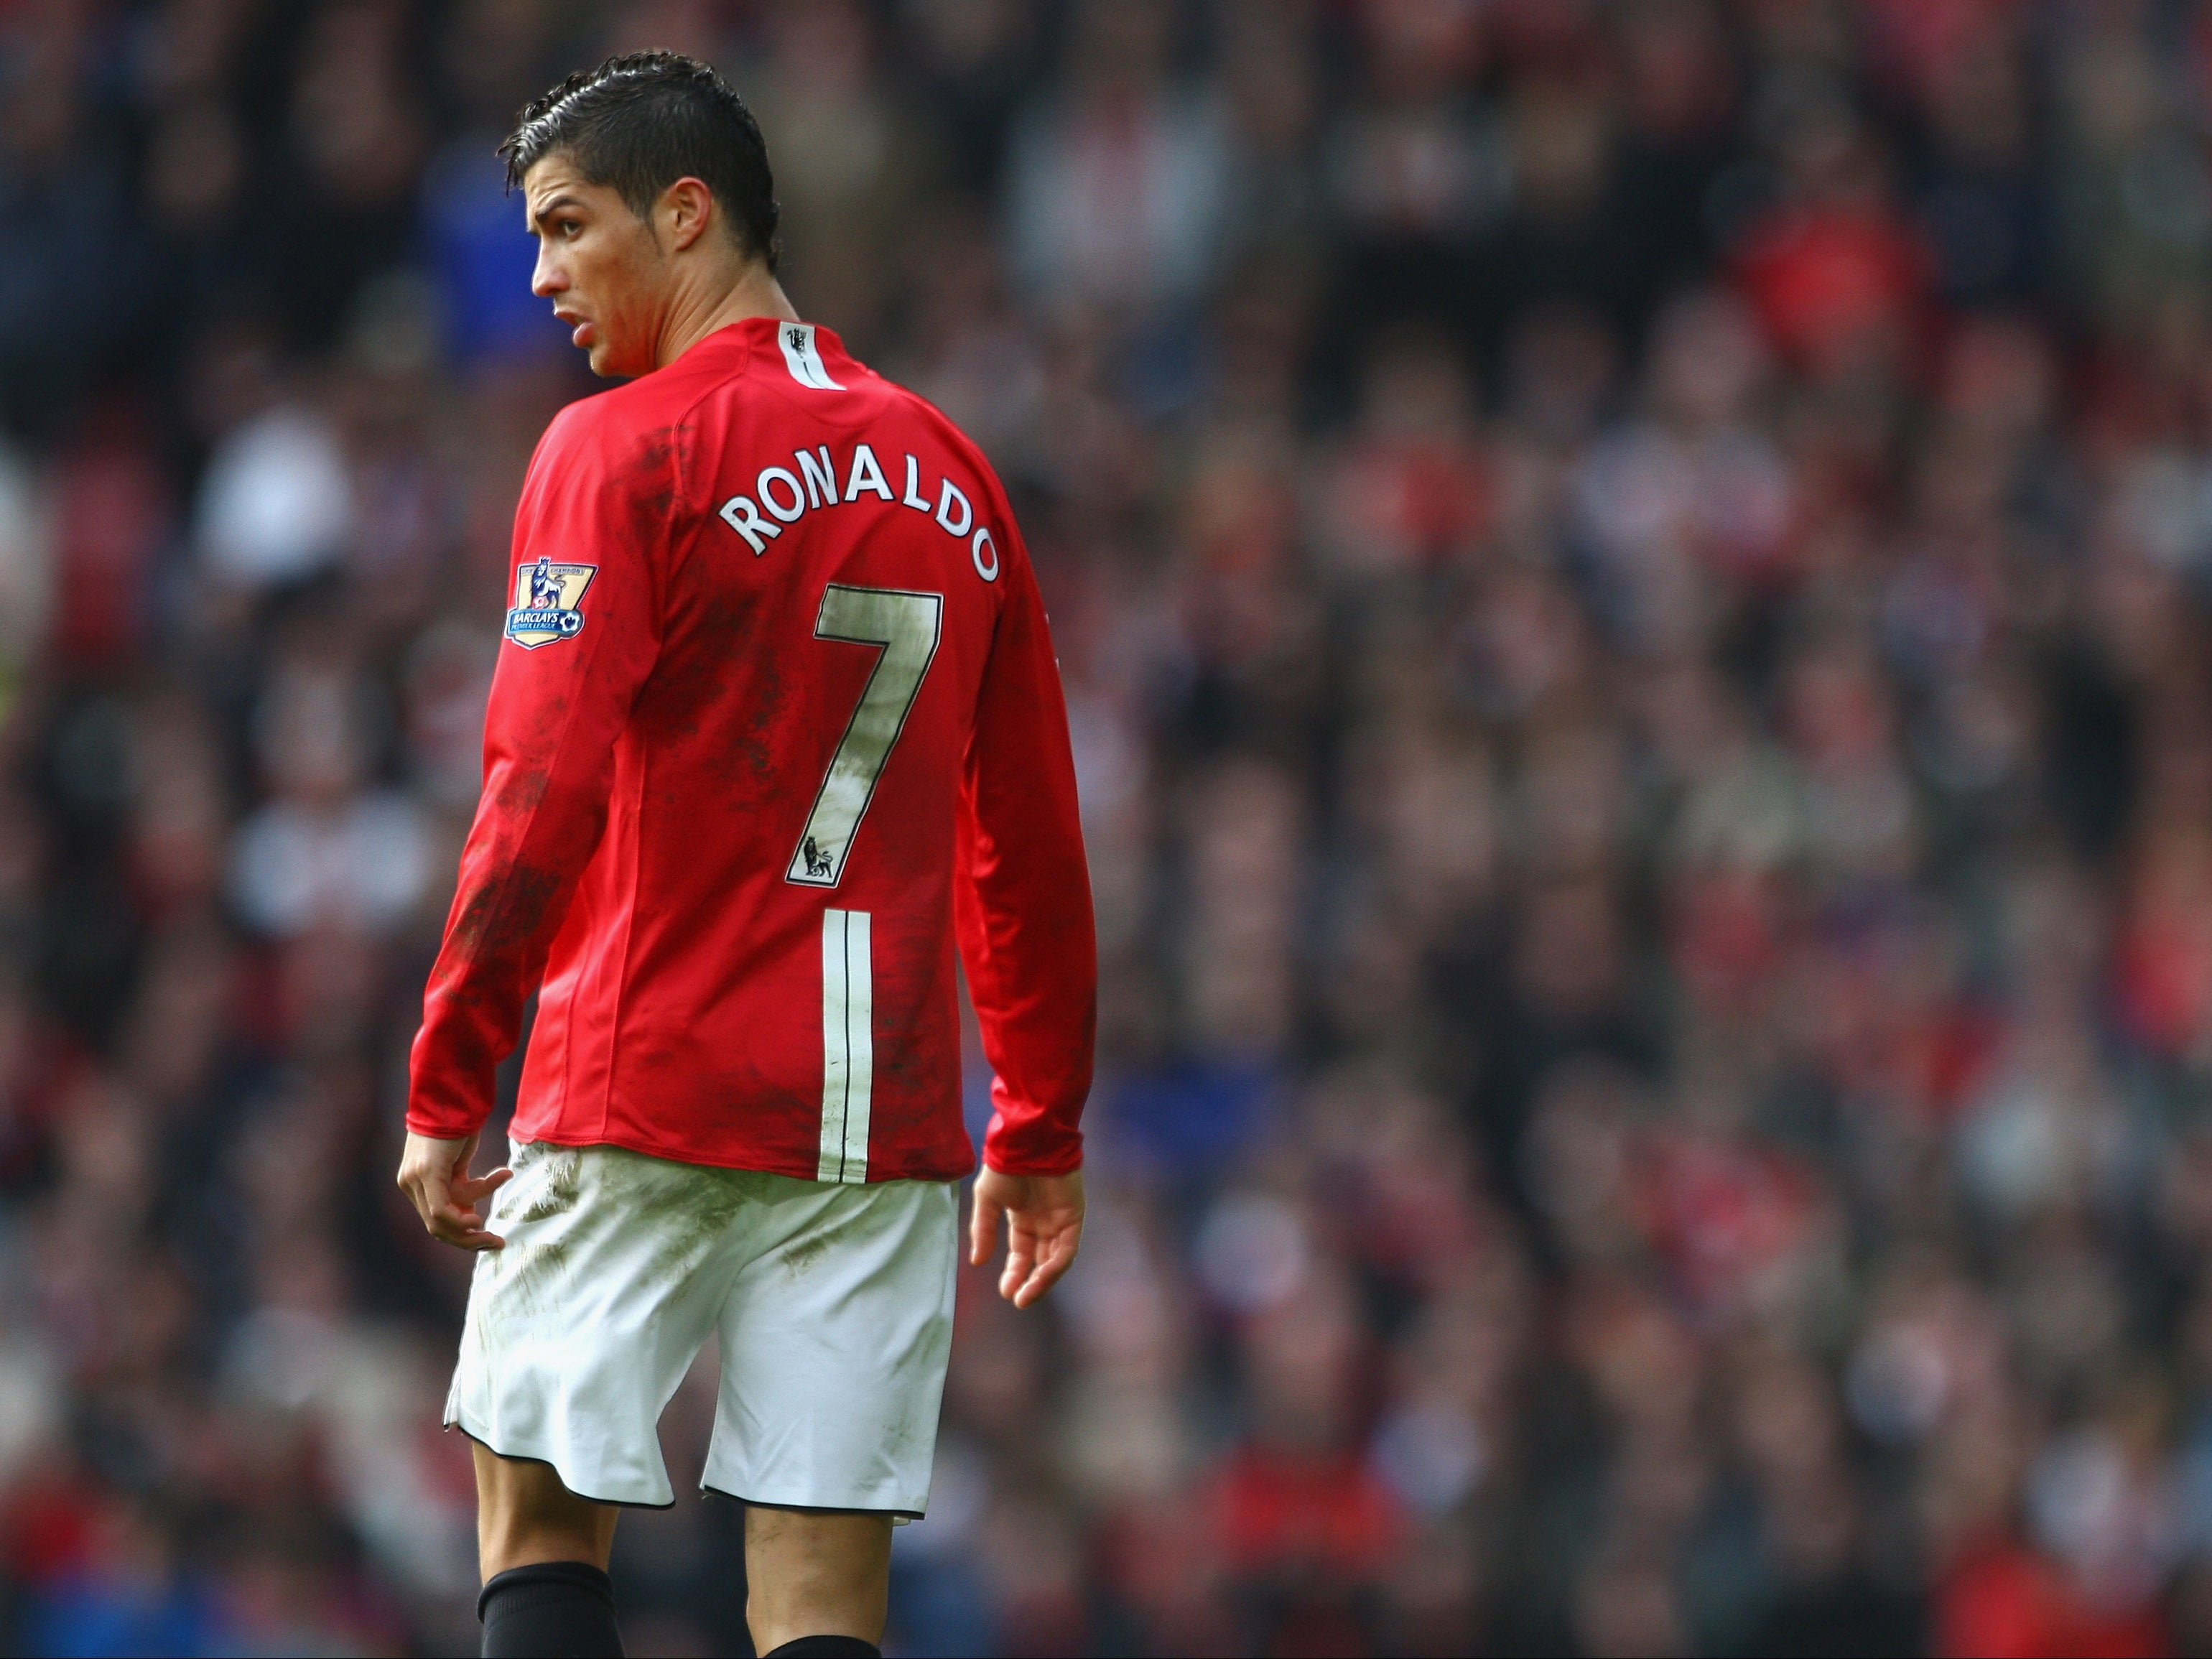 Cristiano Ronaldo, playing for Manchester United in 2009